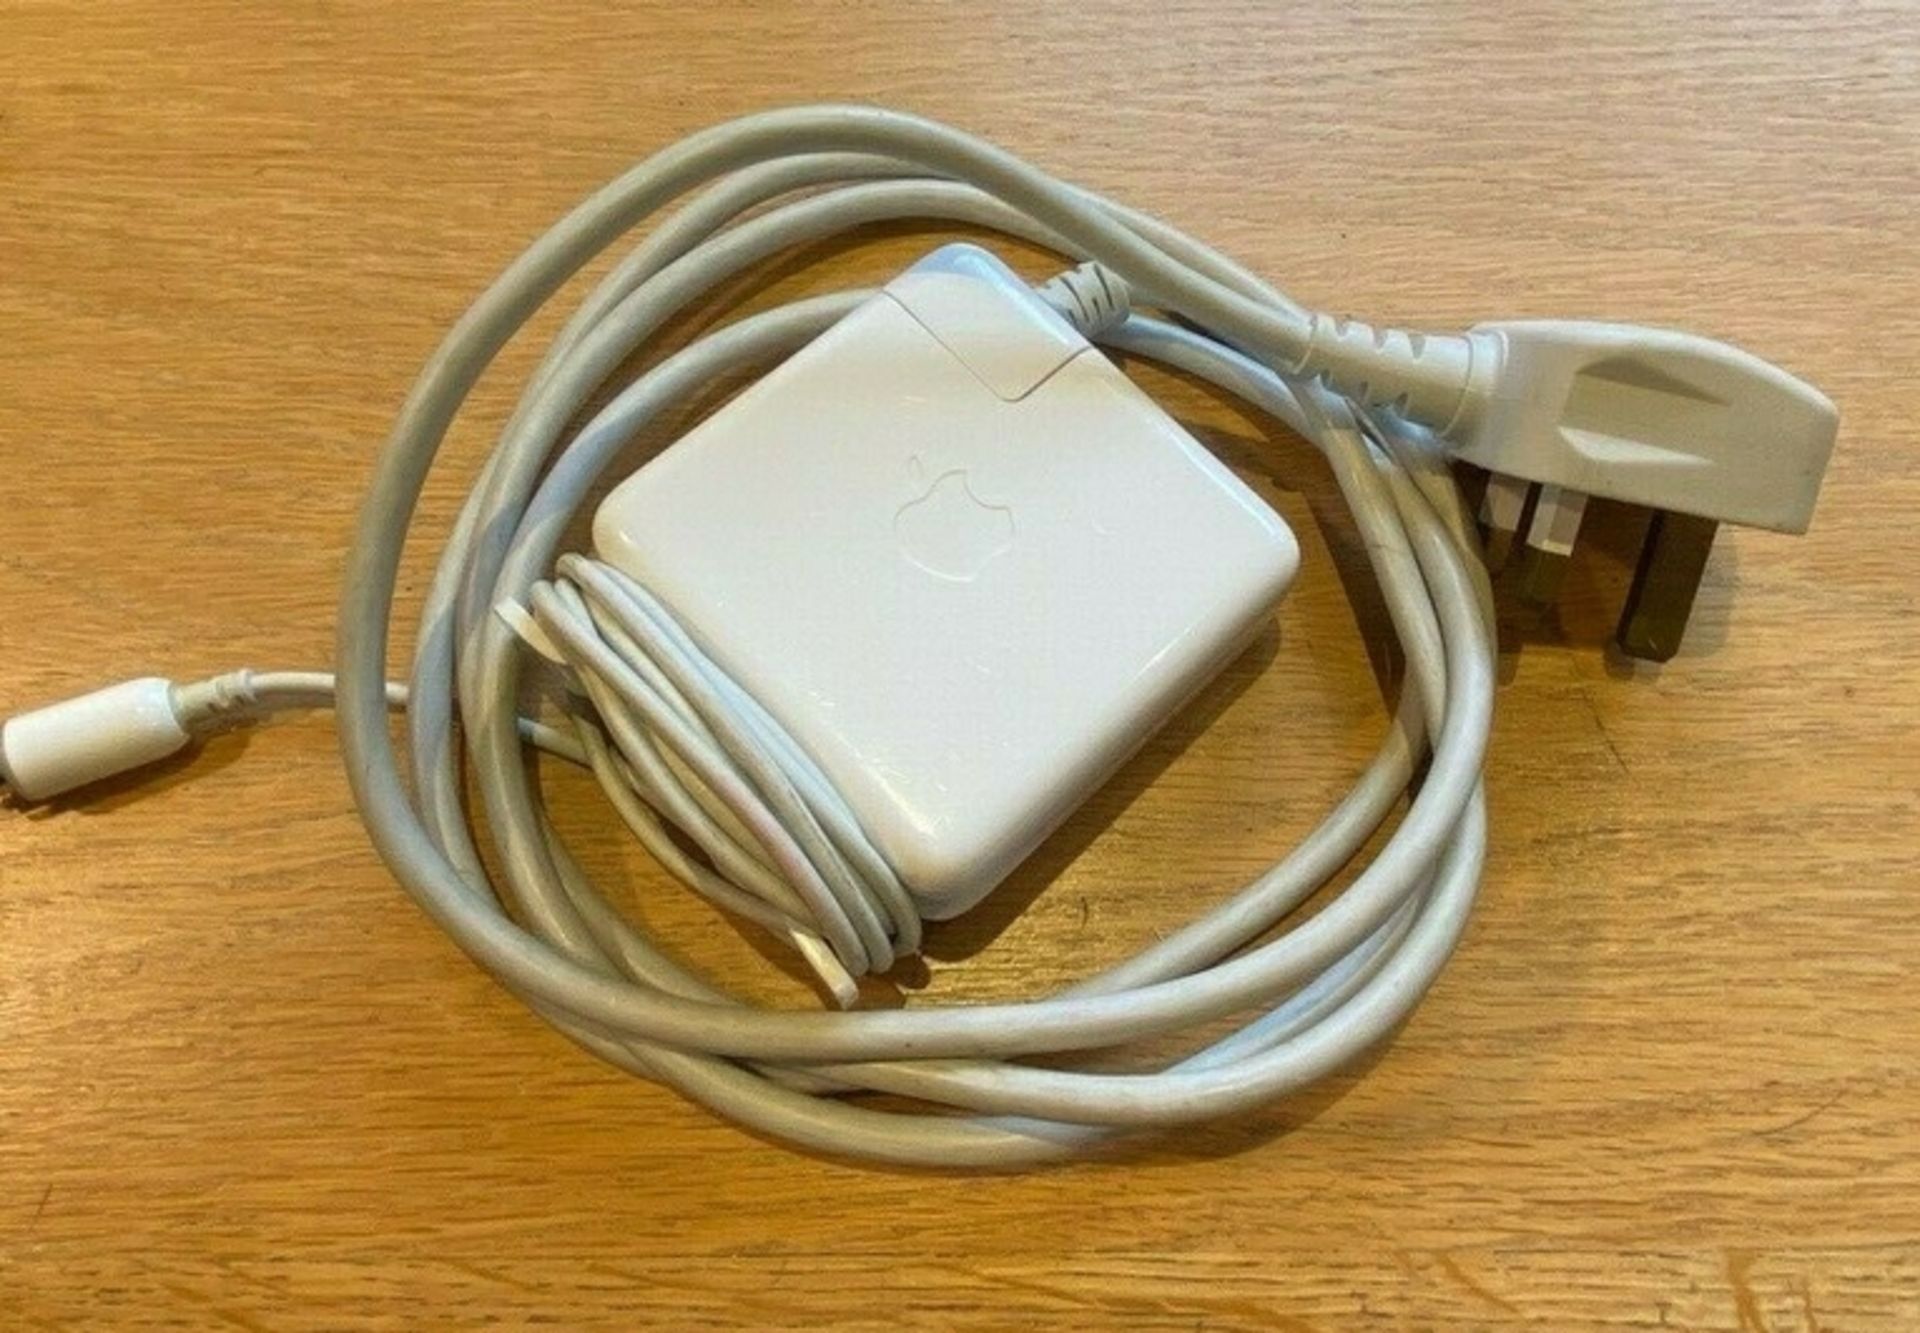 Apple g4 ibook in white, all in working order comes with charger - Image 4 of 7